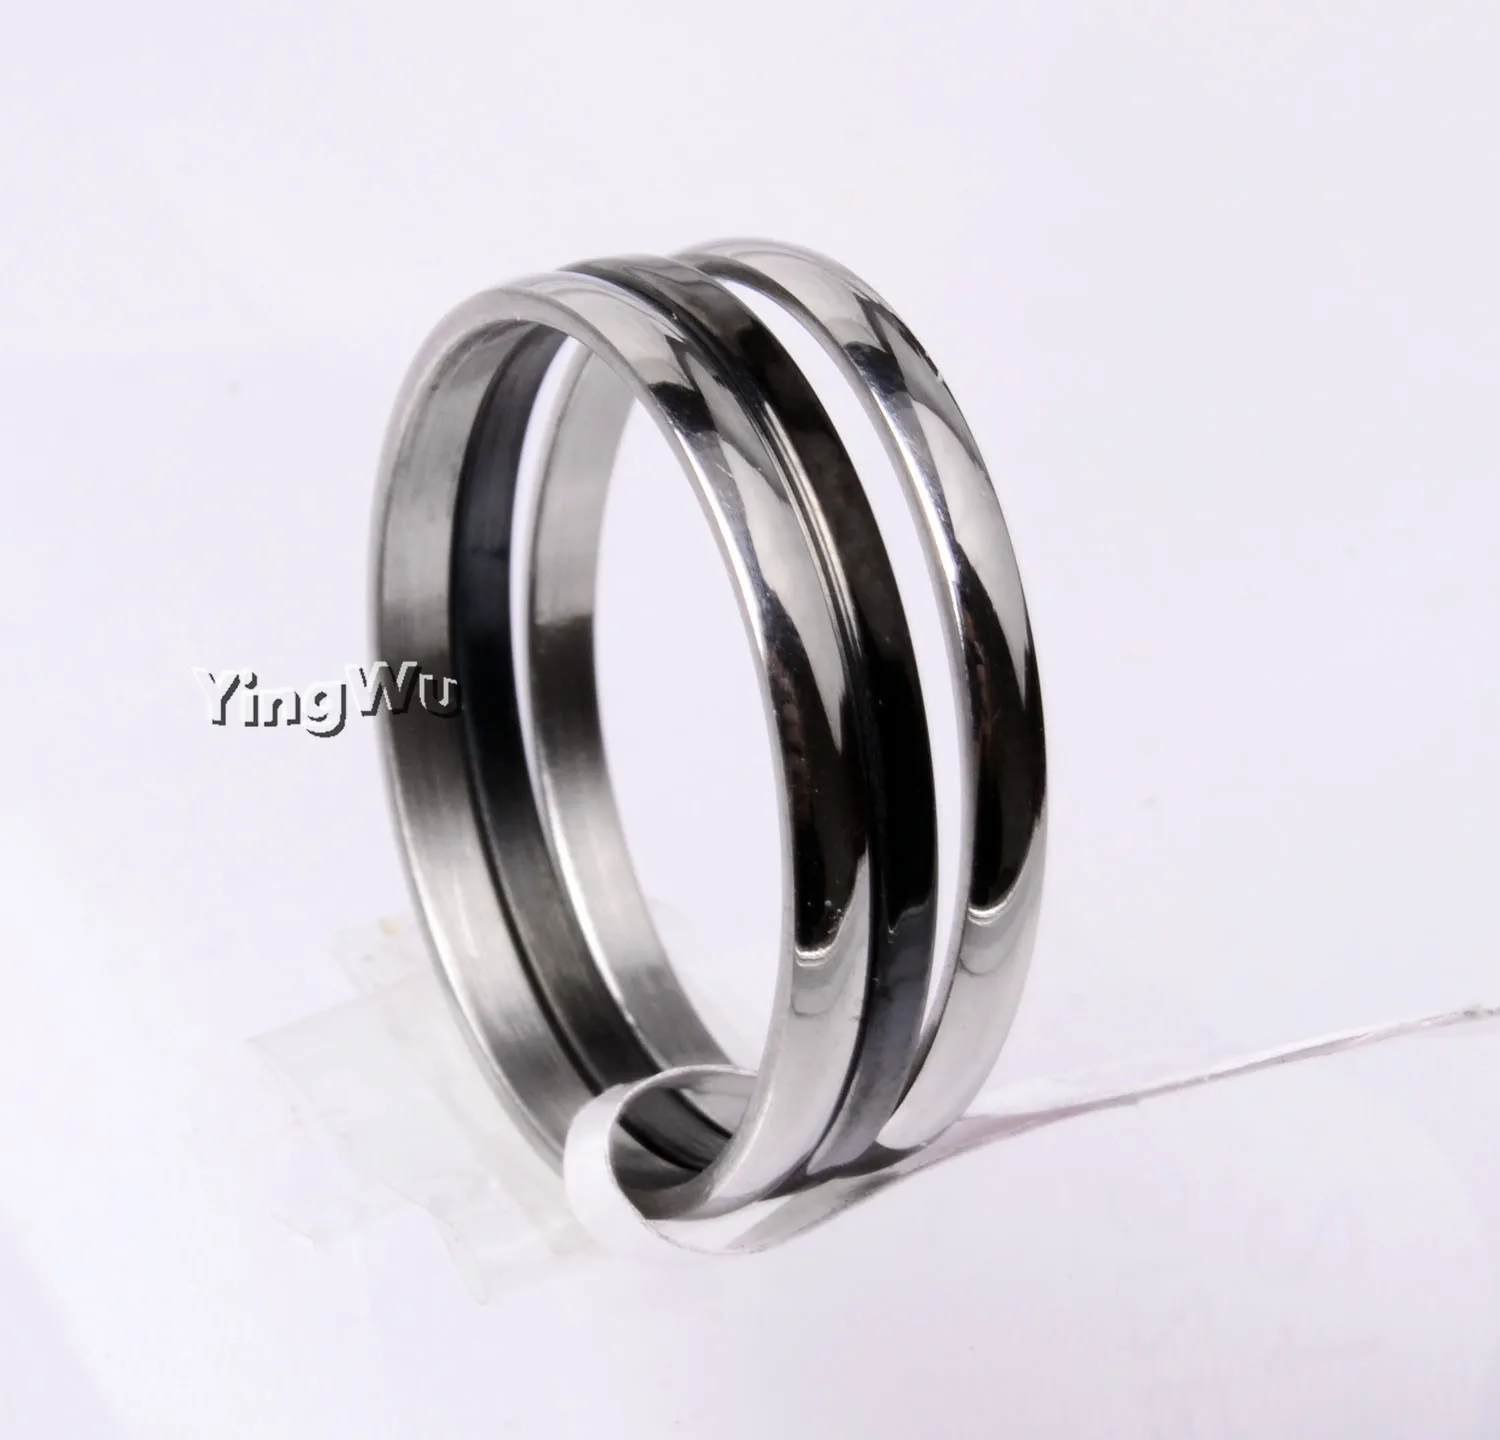 

Yingwu Silver Black Triple Band Rolling Ring 316l Stainless Steel 3 Bands Trinity Rolling Wedding Band Rings 30pcs Lot